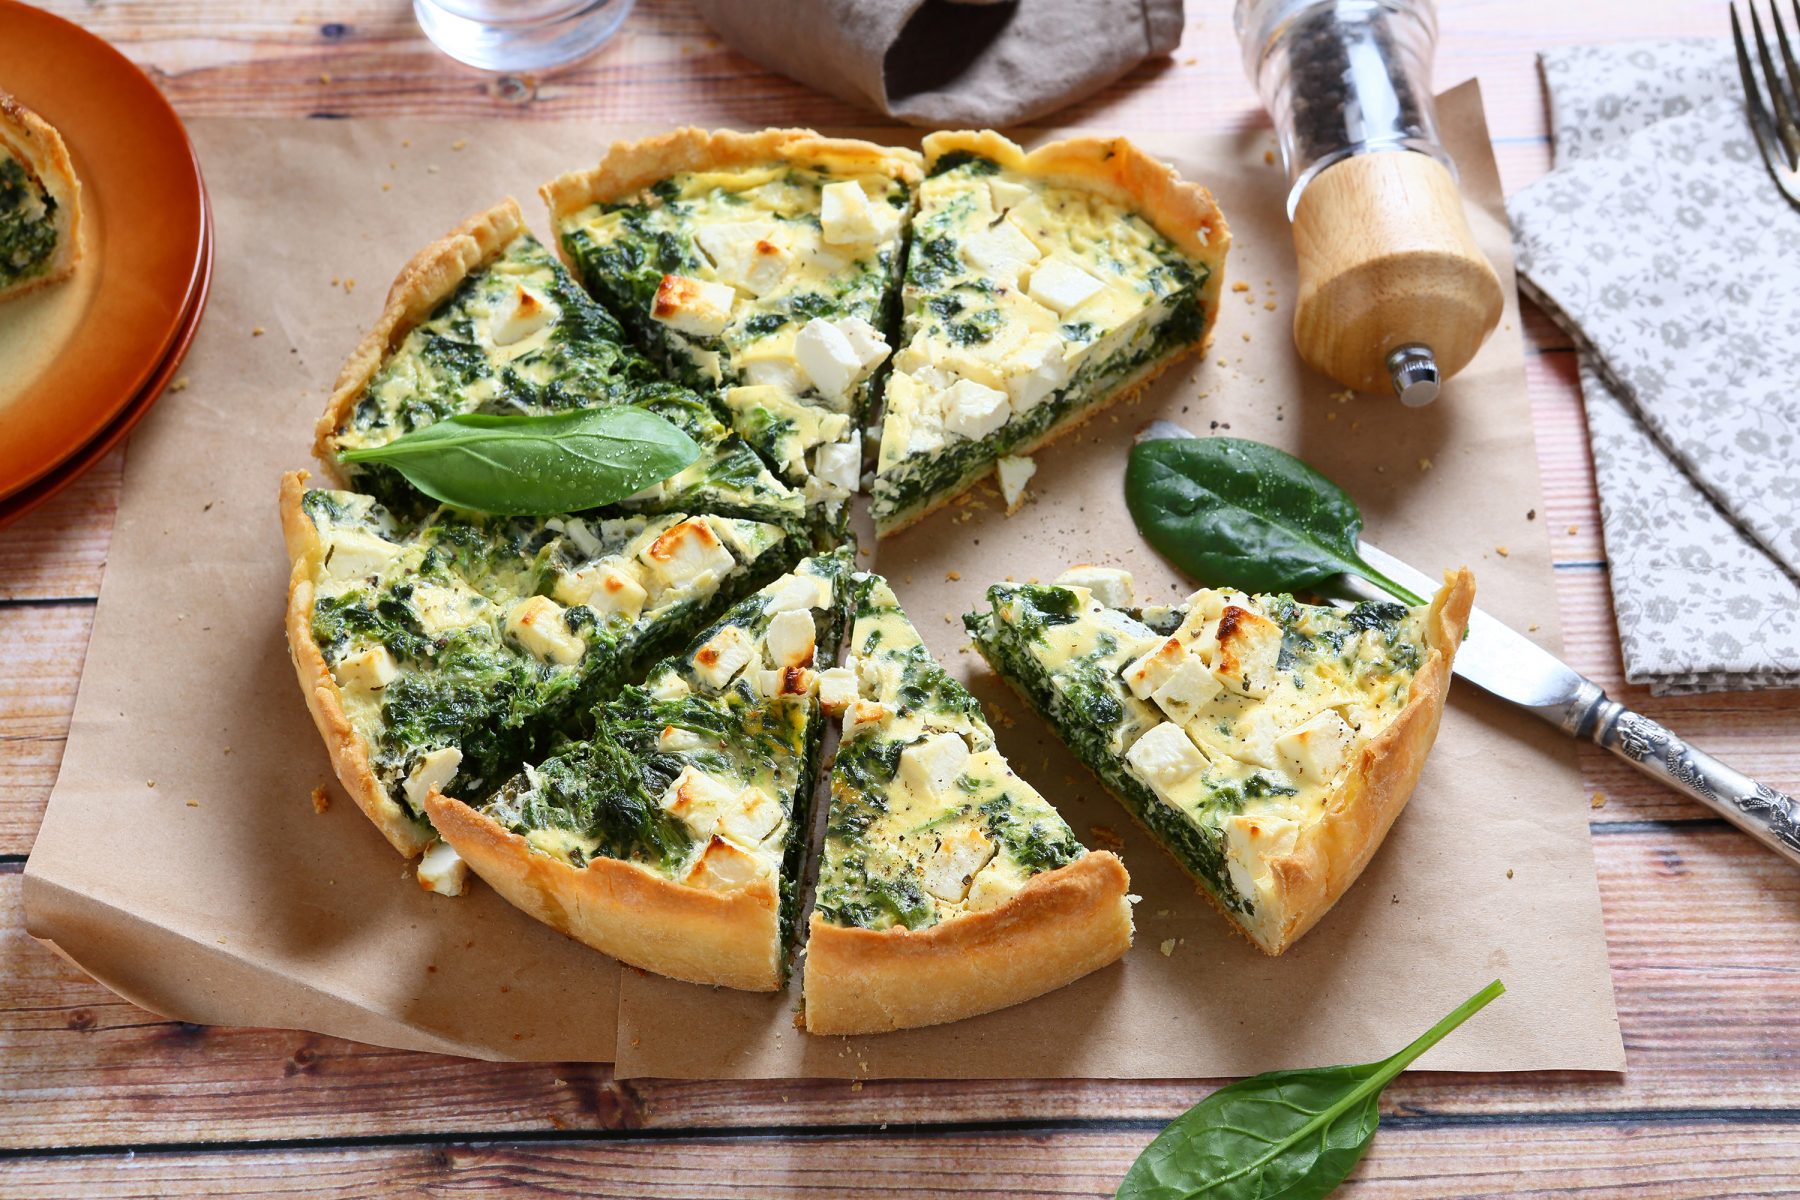 Torta Pascualina - Argentina Spinach and Ricotta Tart/Pie - The Spice ...